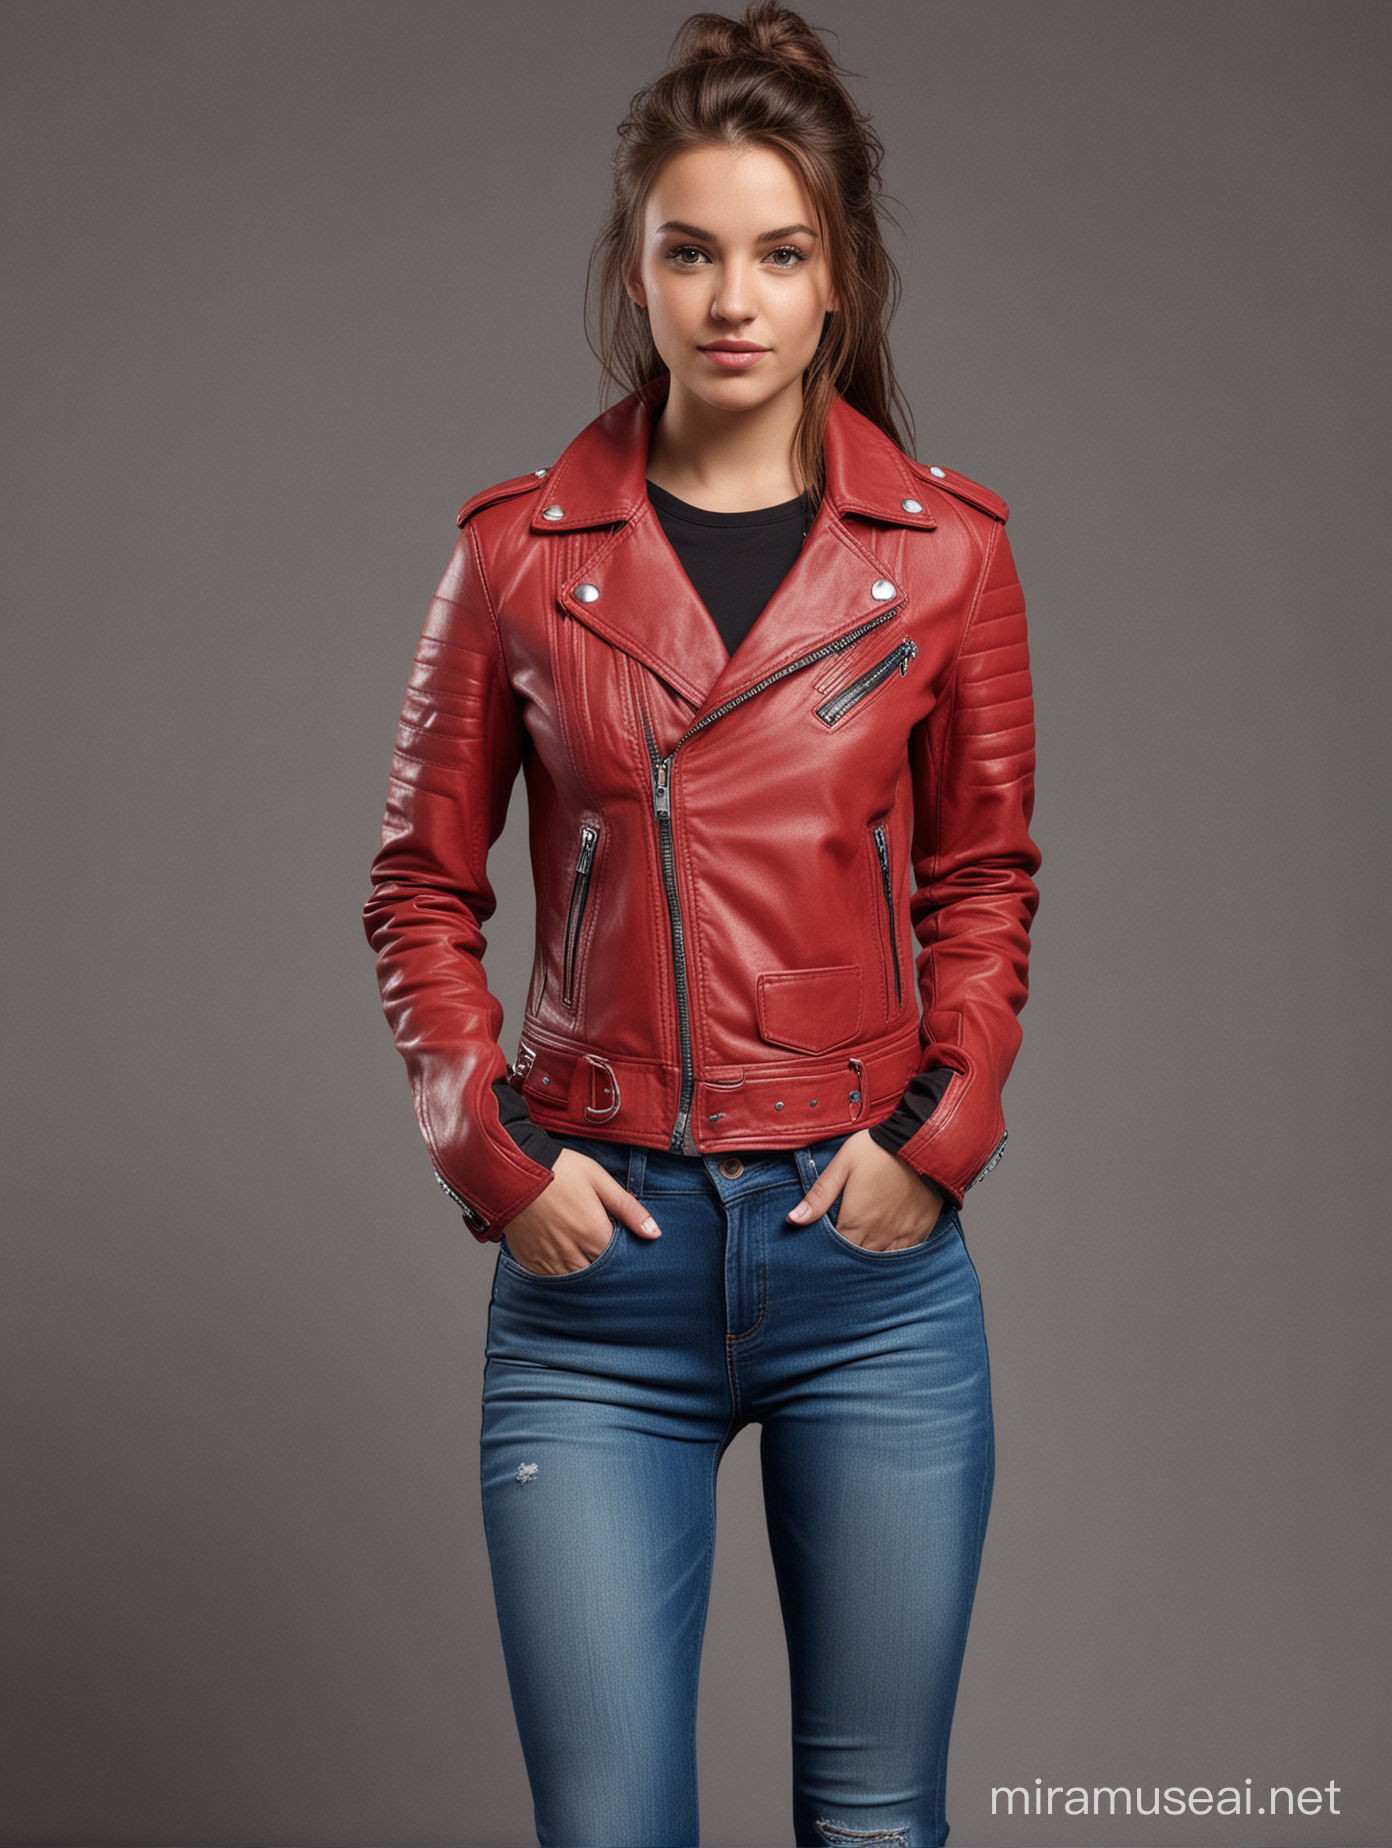 Young American Woman in Red Leather Jacket and Biker Gloves